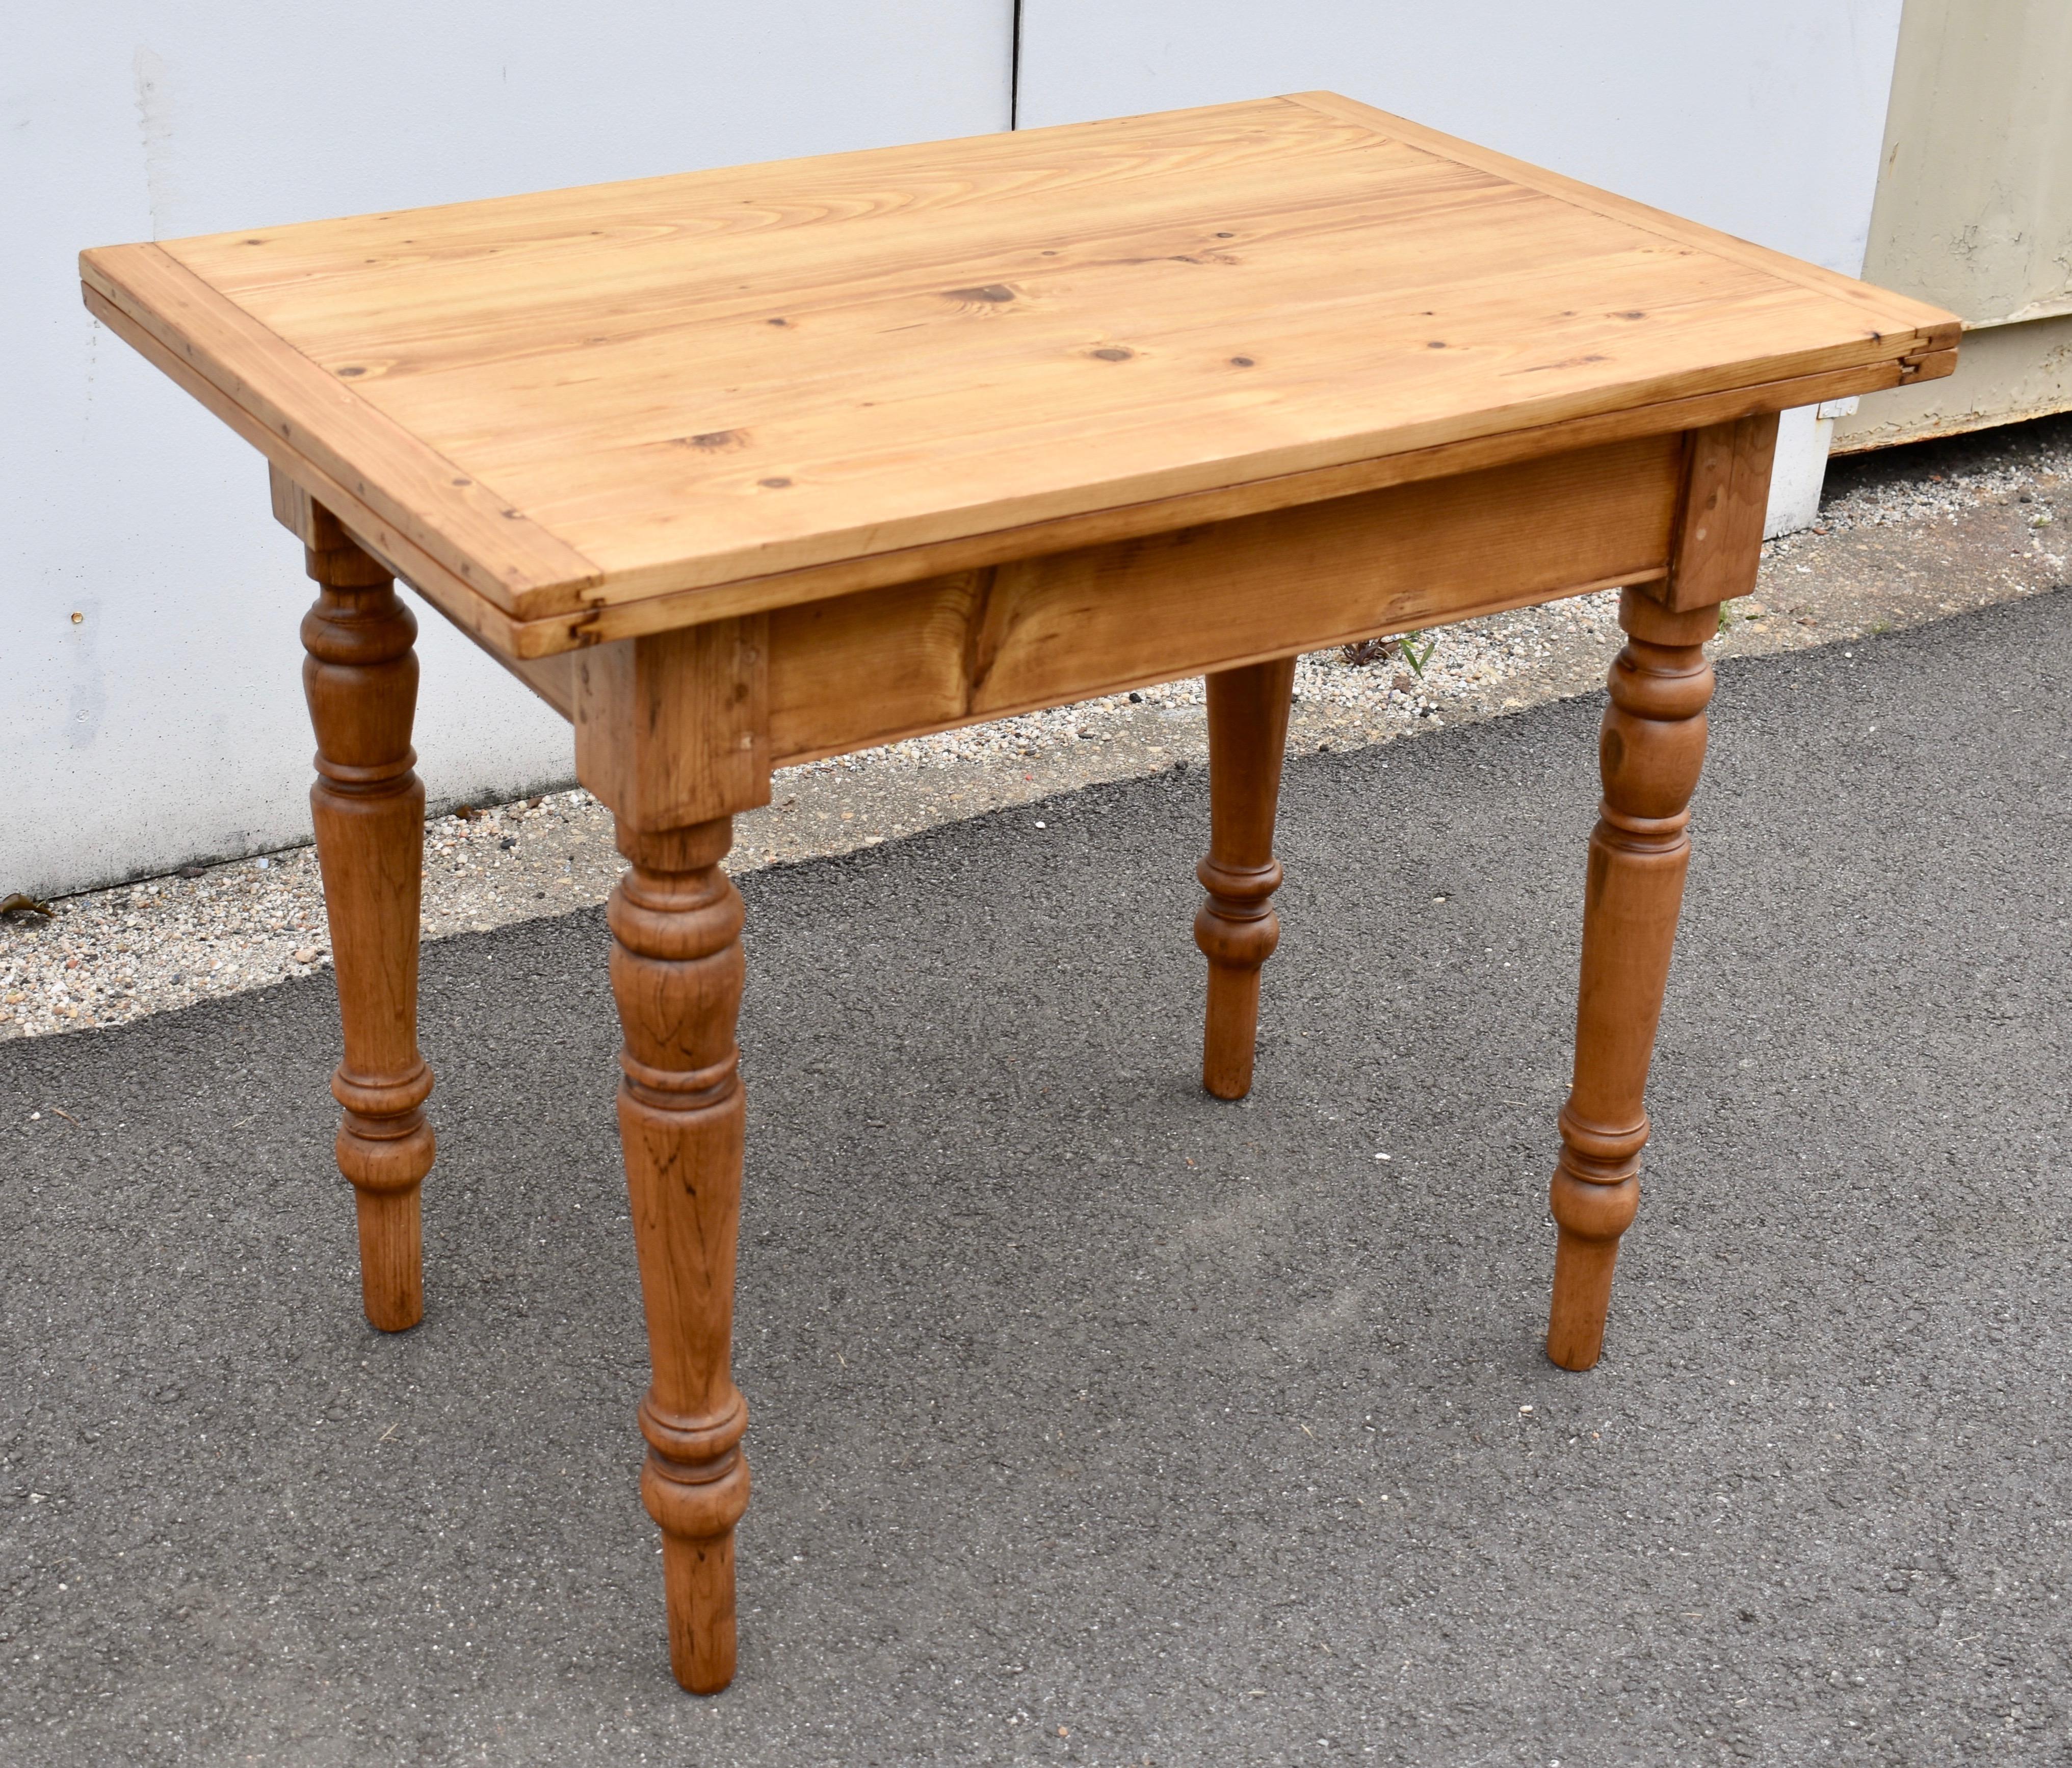 Hungarian Pine Turned Leg Swivel-Top Table For Sale